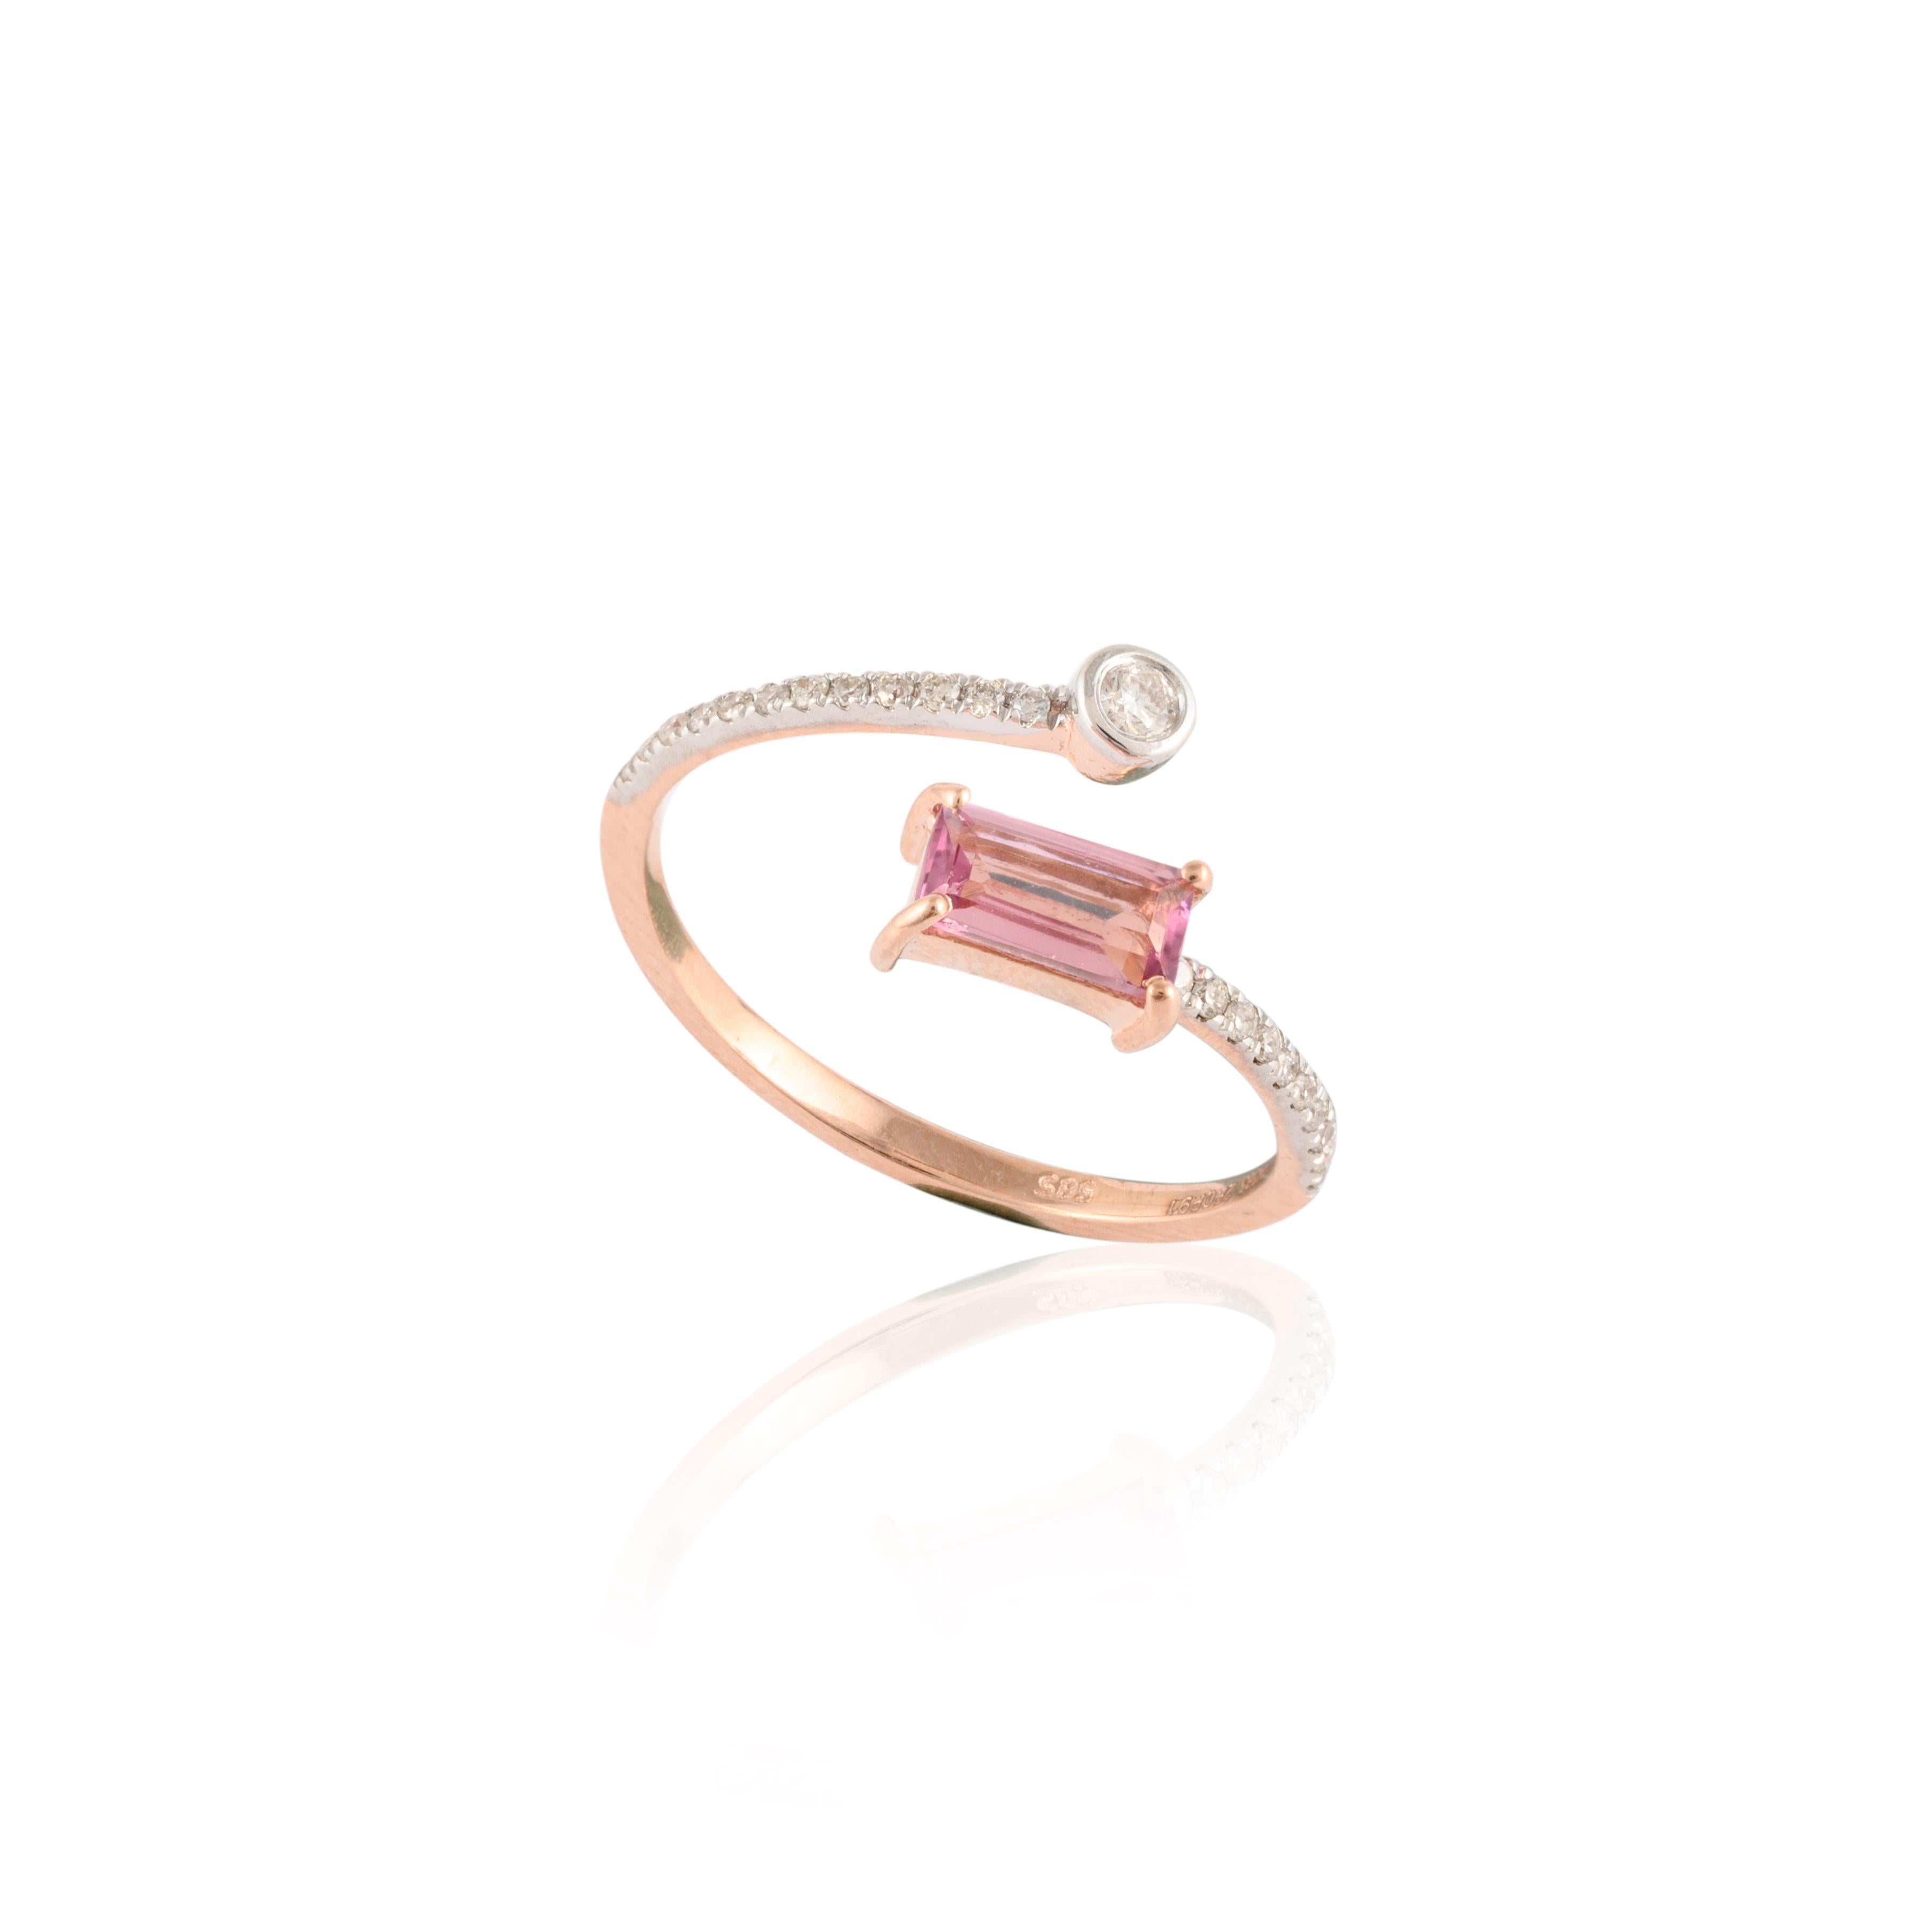 For Sale:  14k Solid Rose Gold Diamond and Baguette Cut Pink Tourmaline Wrap Ring 9